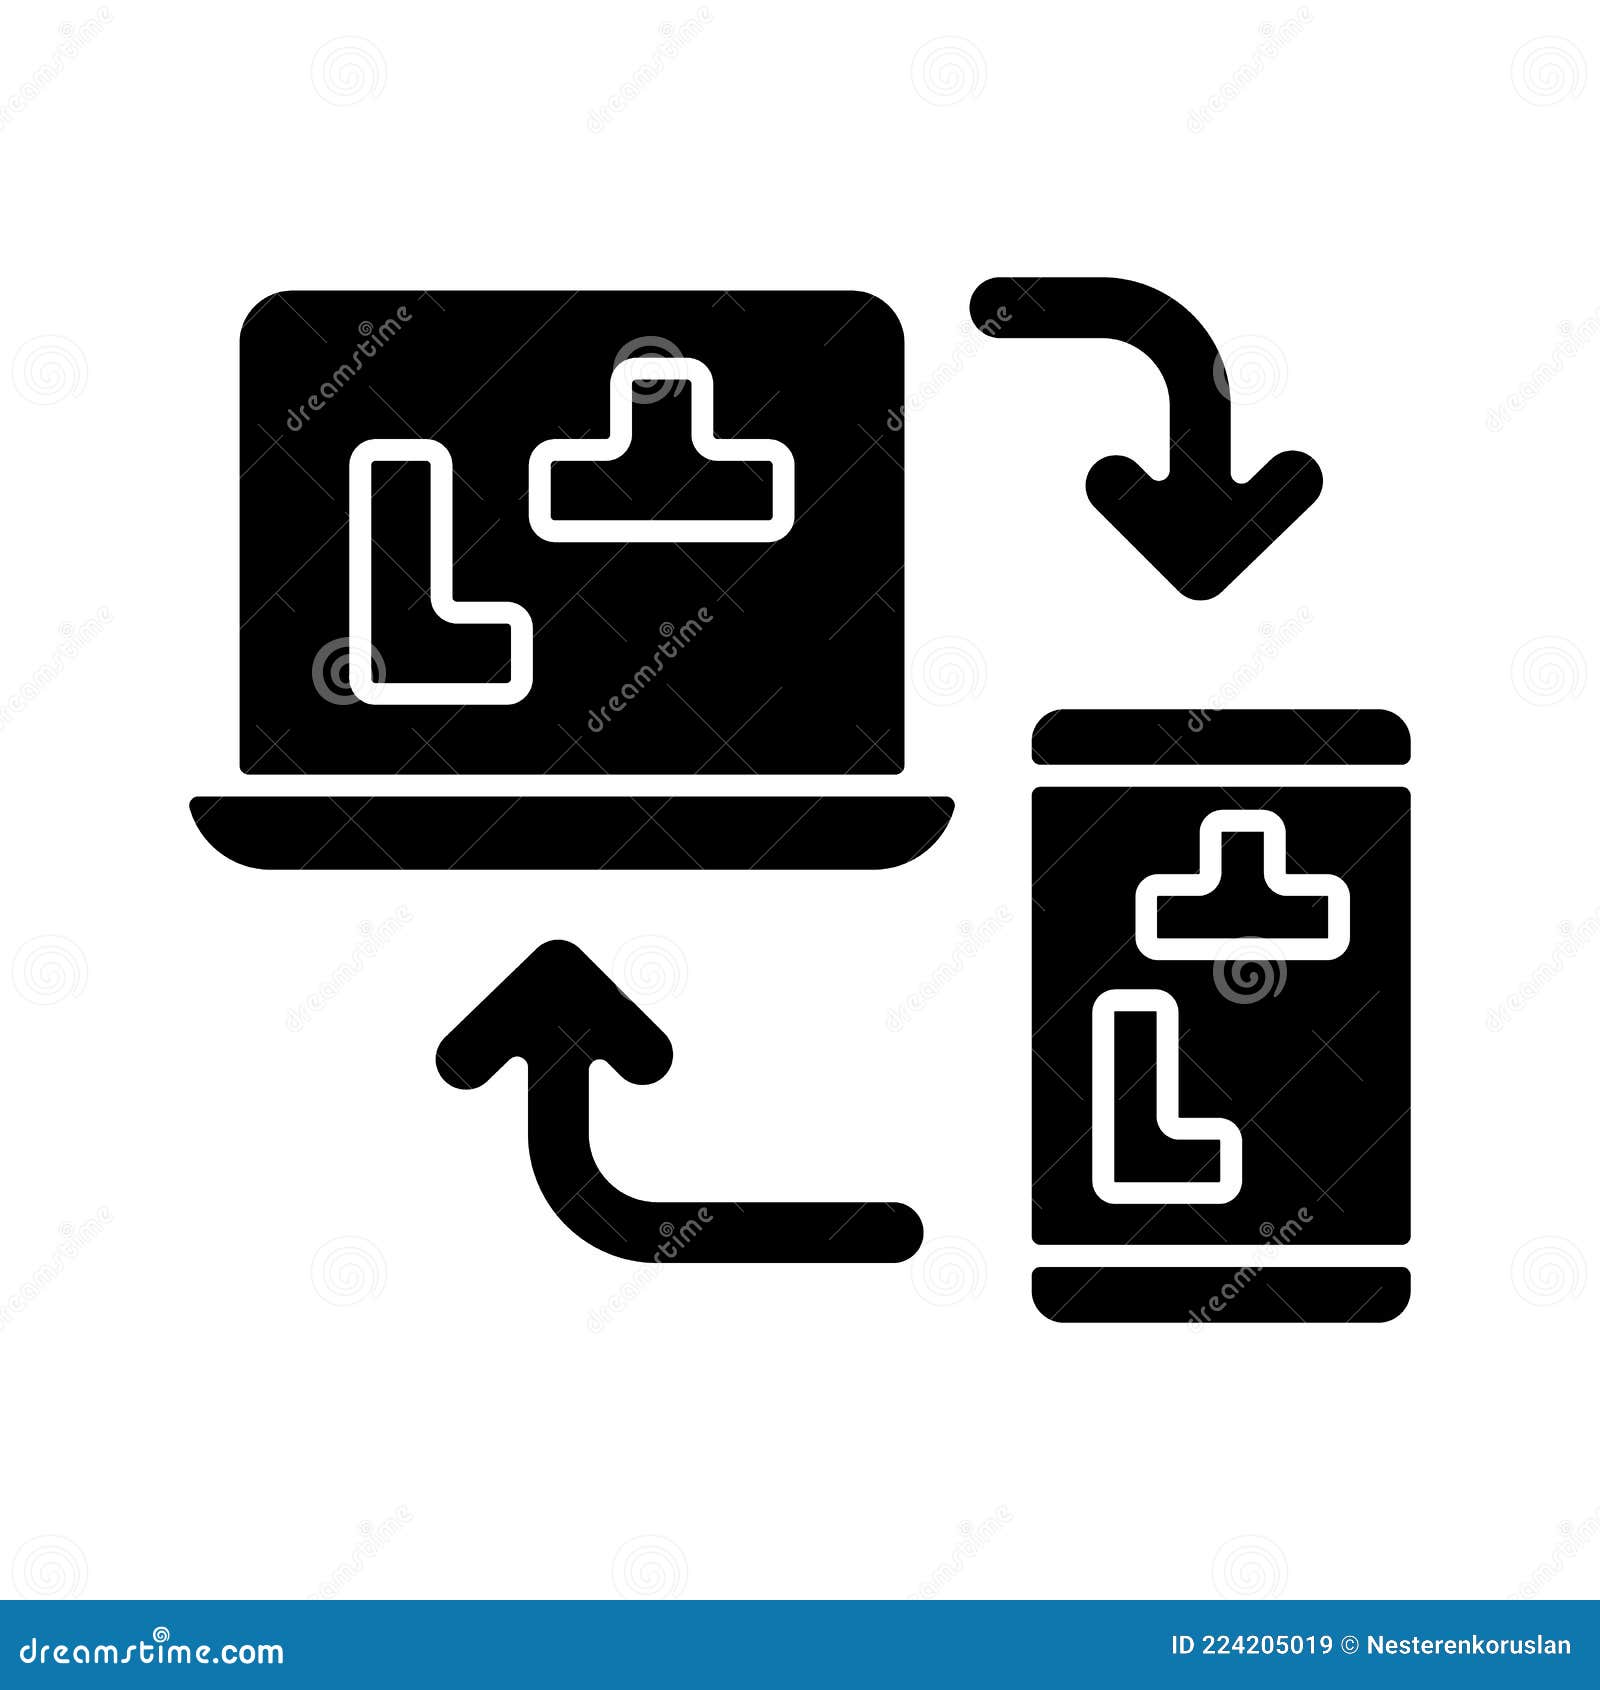 Cross platform play online gaming concept icon Vector Image